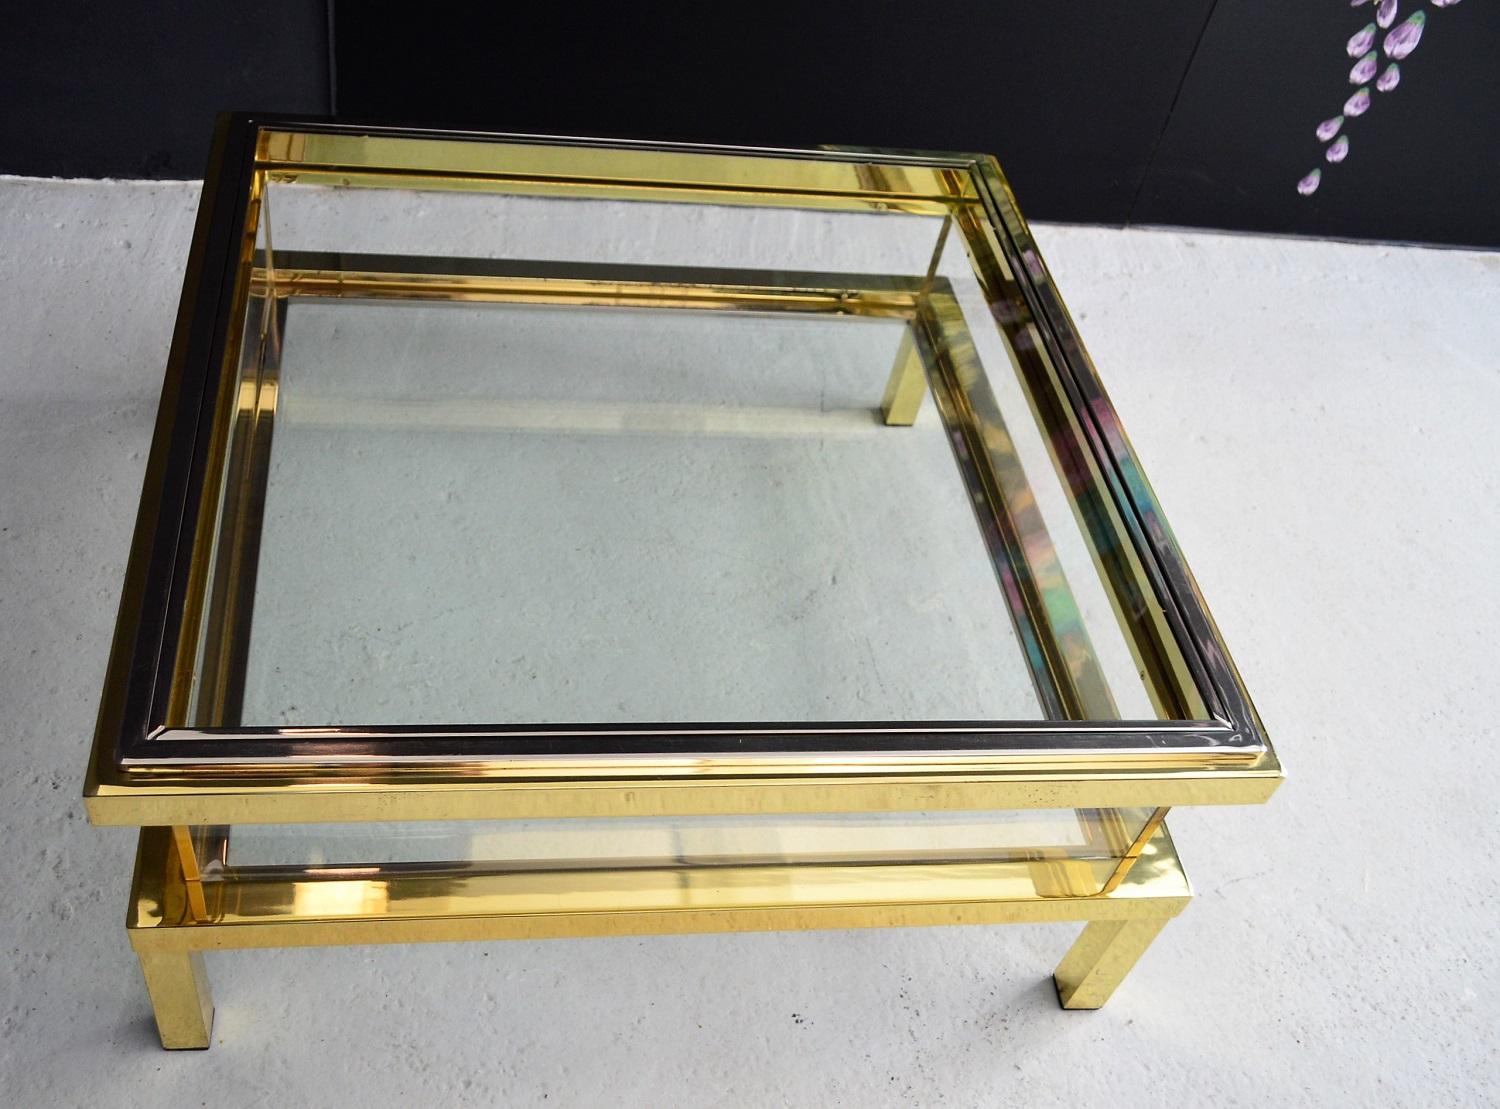 Polished French Regency Coffee Table with Brass Sliding Showcase by Maison Jansen, 1970s